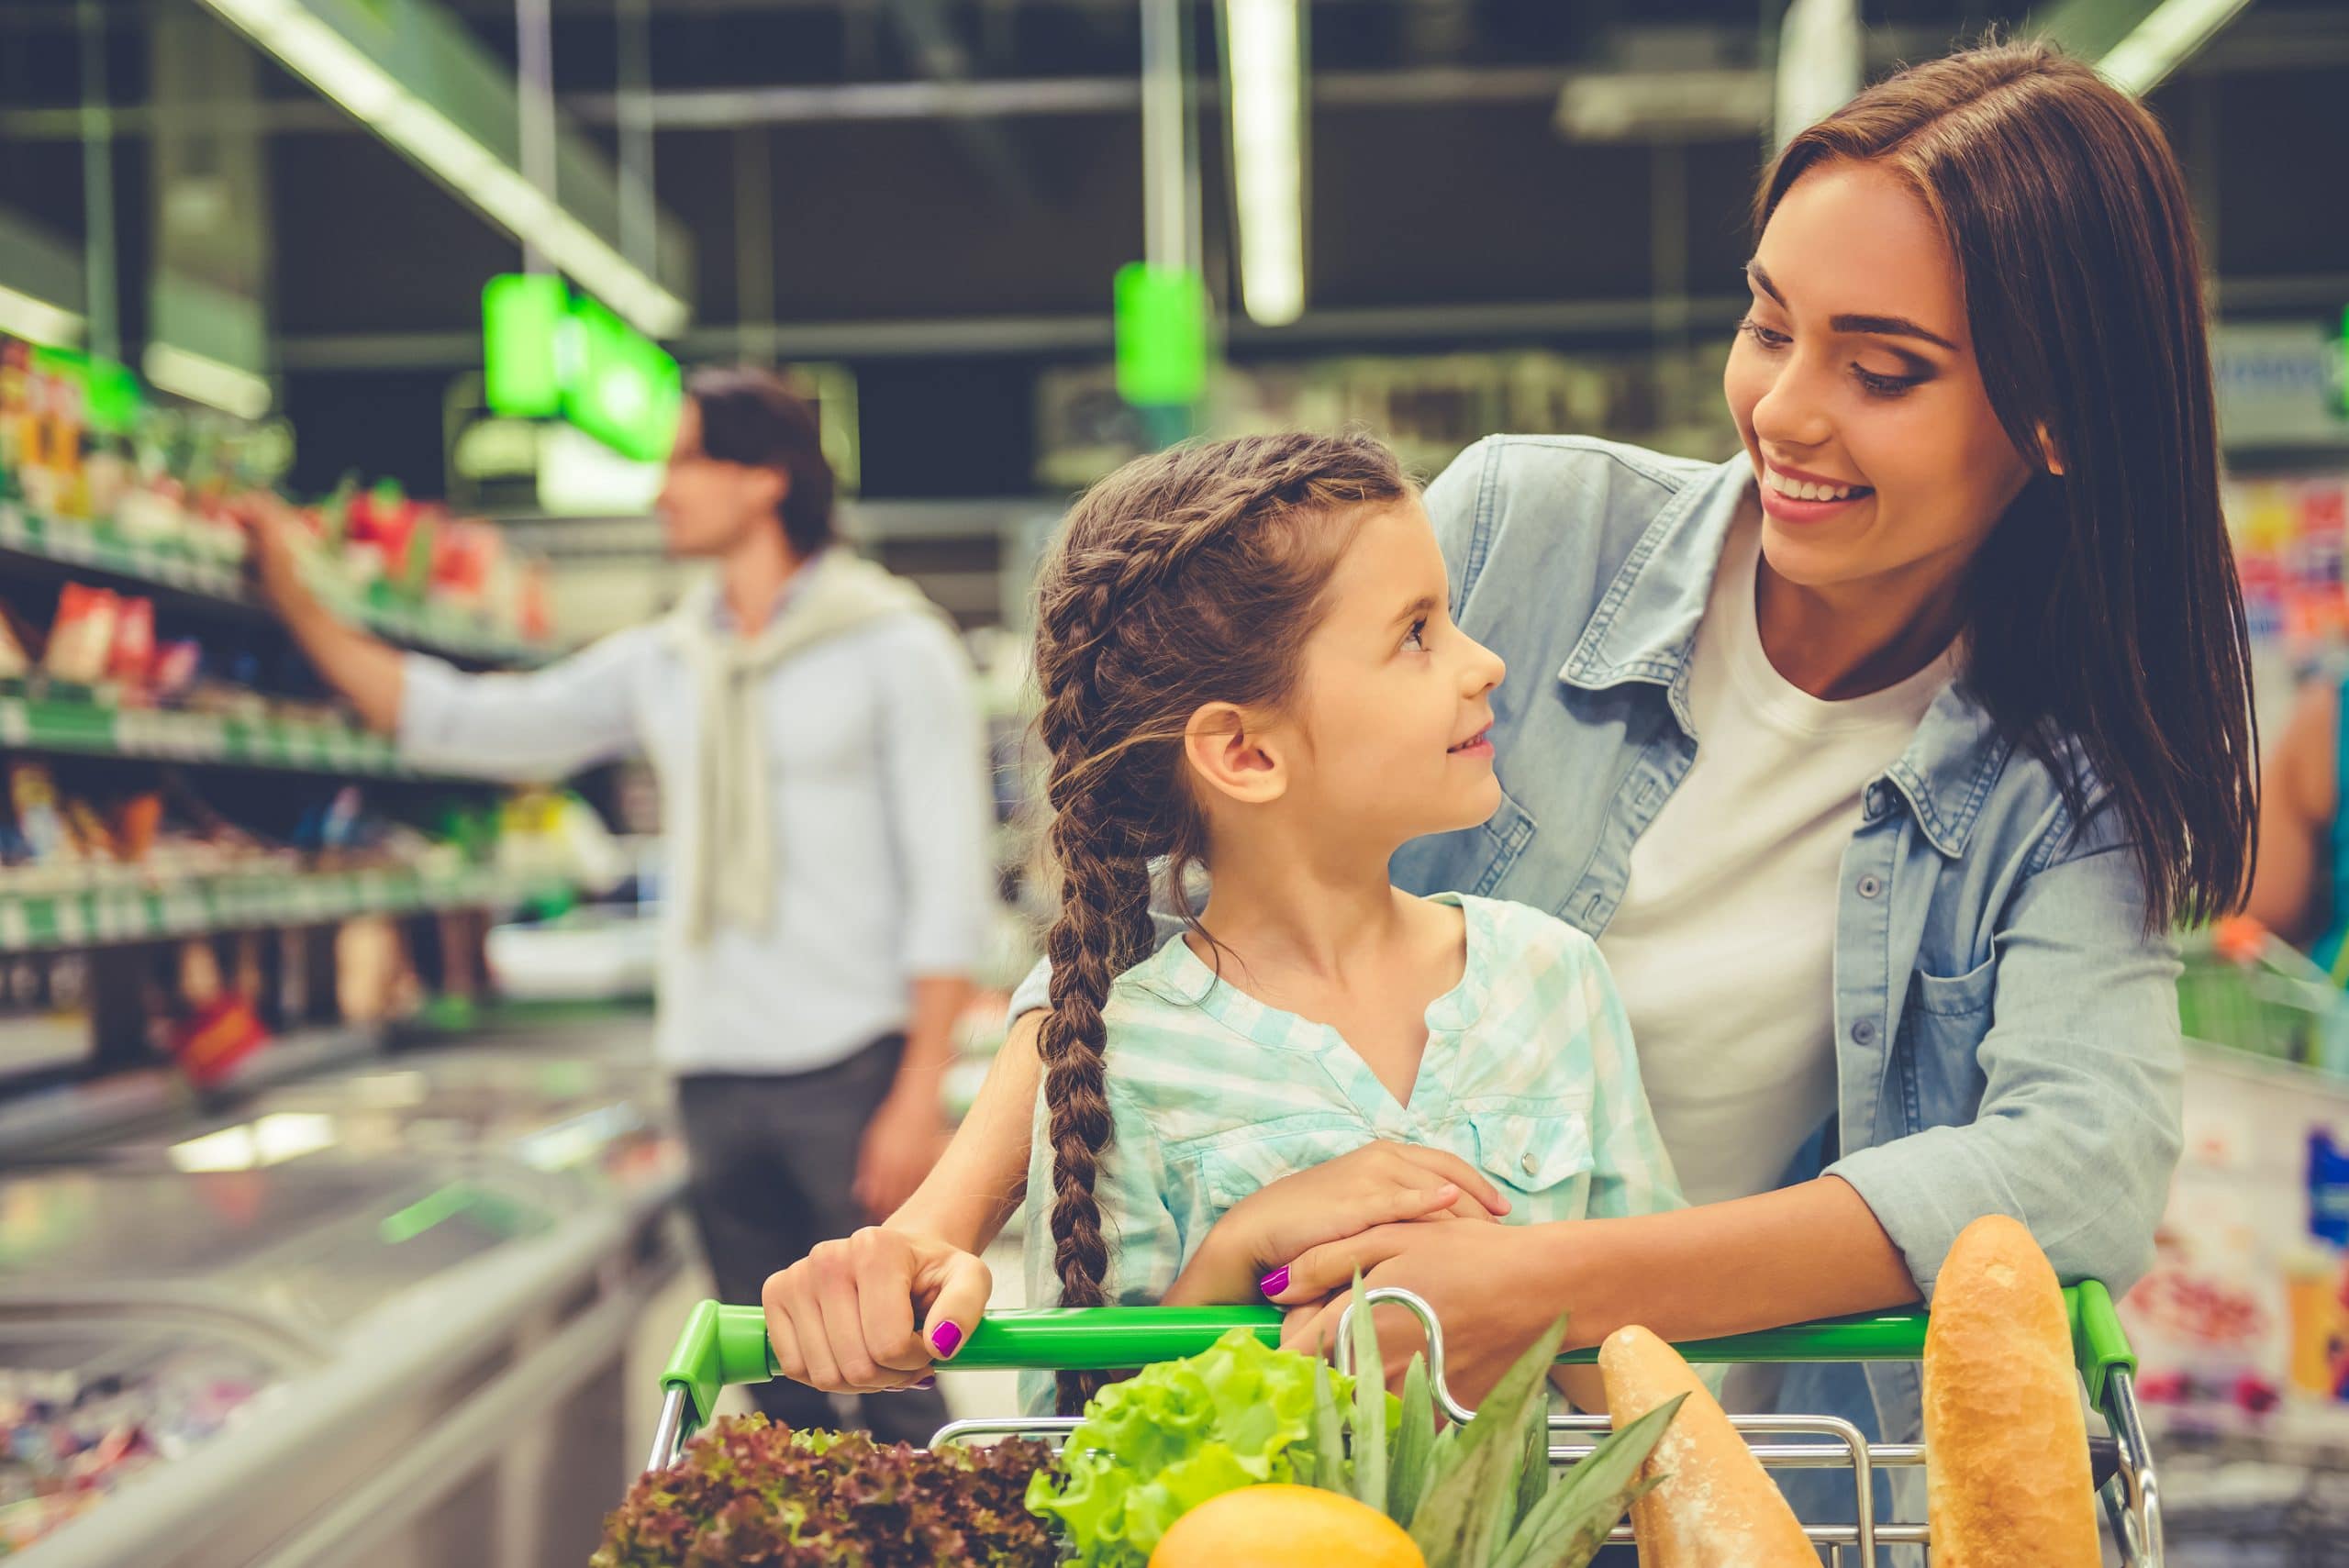 Mom-approved cash back apps for groceries